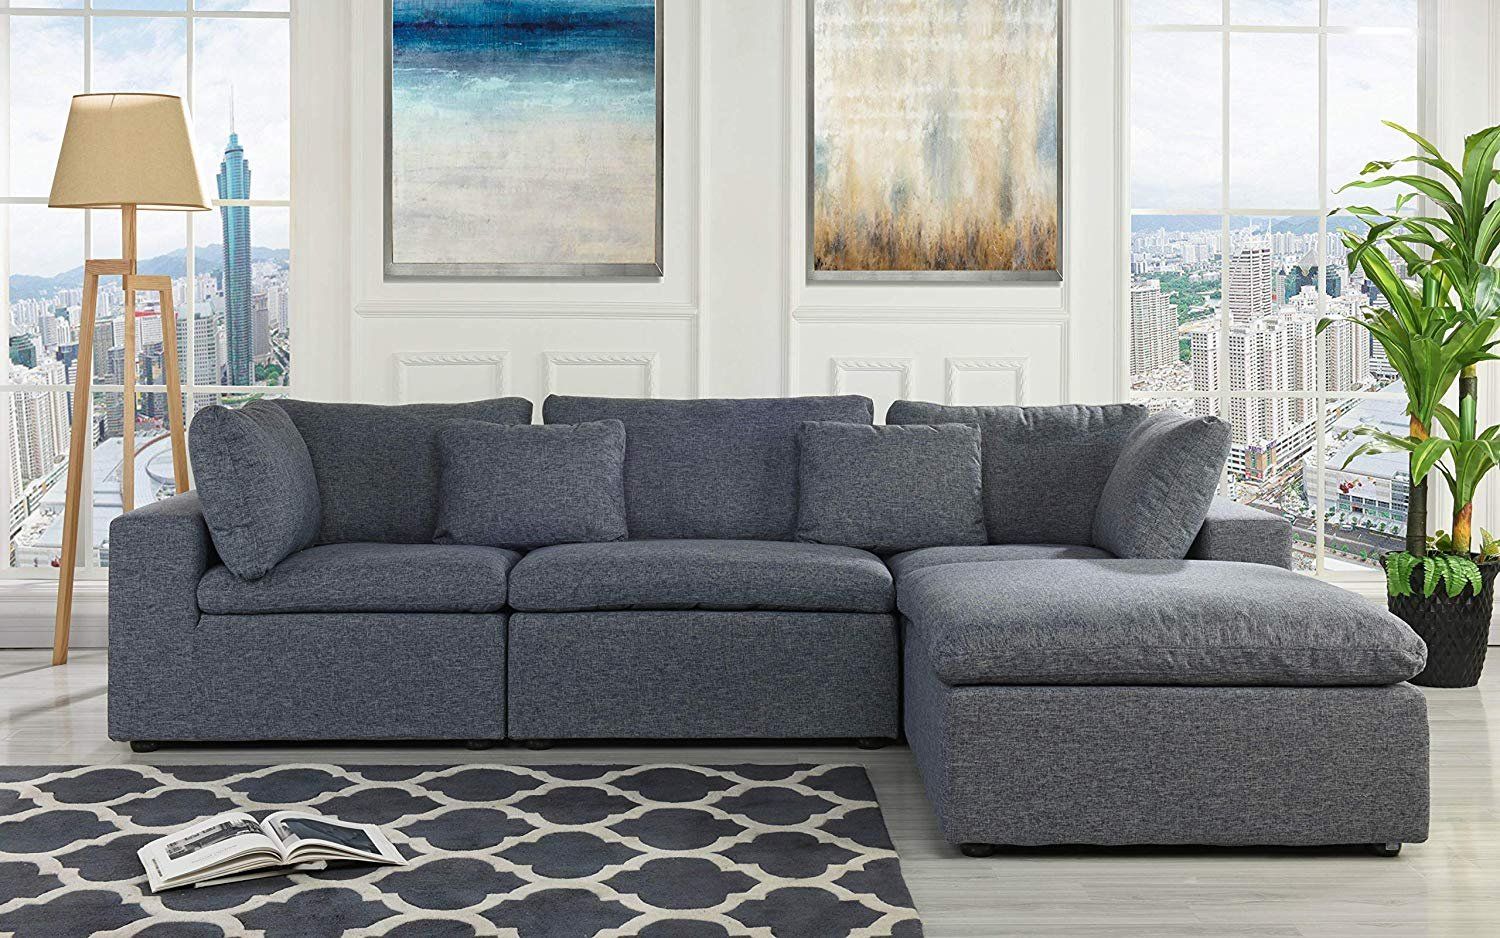 Classic Large Dark Grey Sectional Sofa, L Shape Fabric Couch With Wide Within Dark Gray Sectional Sofas (Gallery 8 of 20)